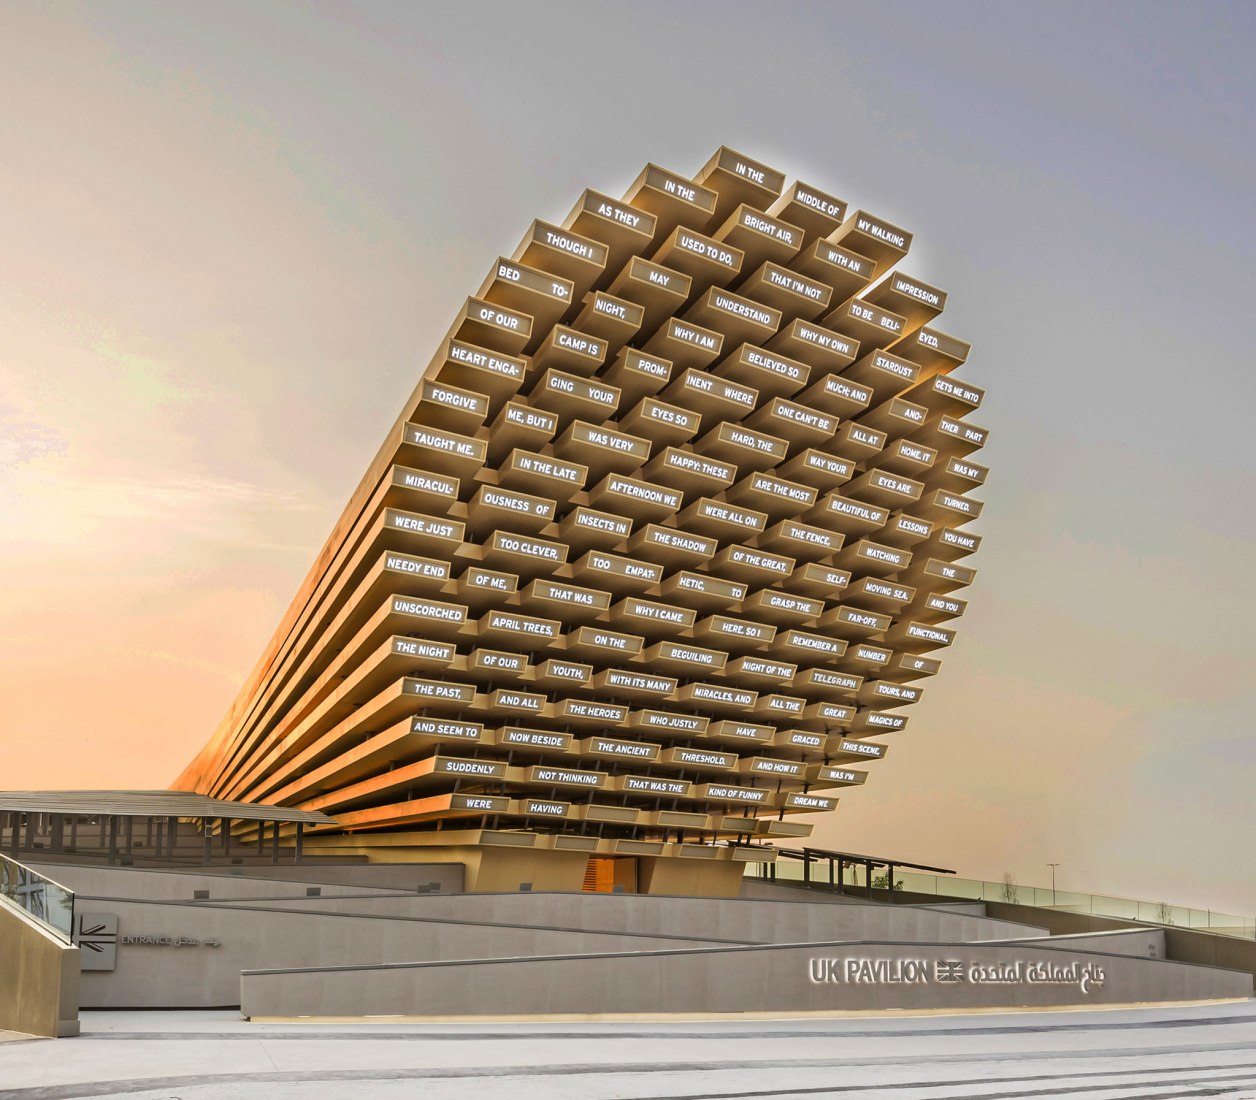 UK Pavilion at Expo 2020 Dubai by Es Devlin OBE. Photograph by Alin Constantin Photography